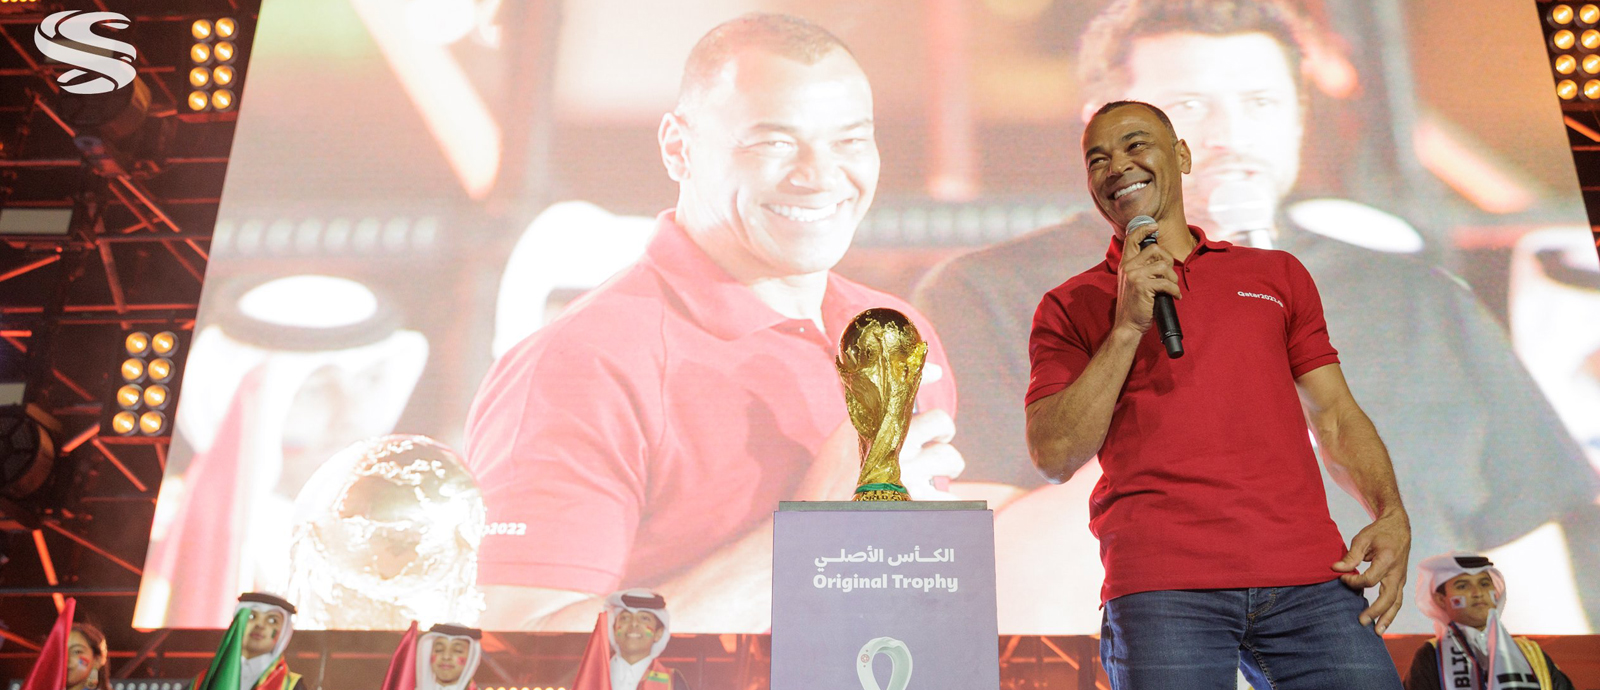 FIFA World Cup Trophy to visit 54 countries